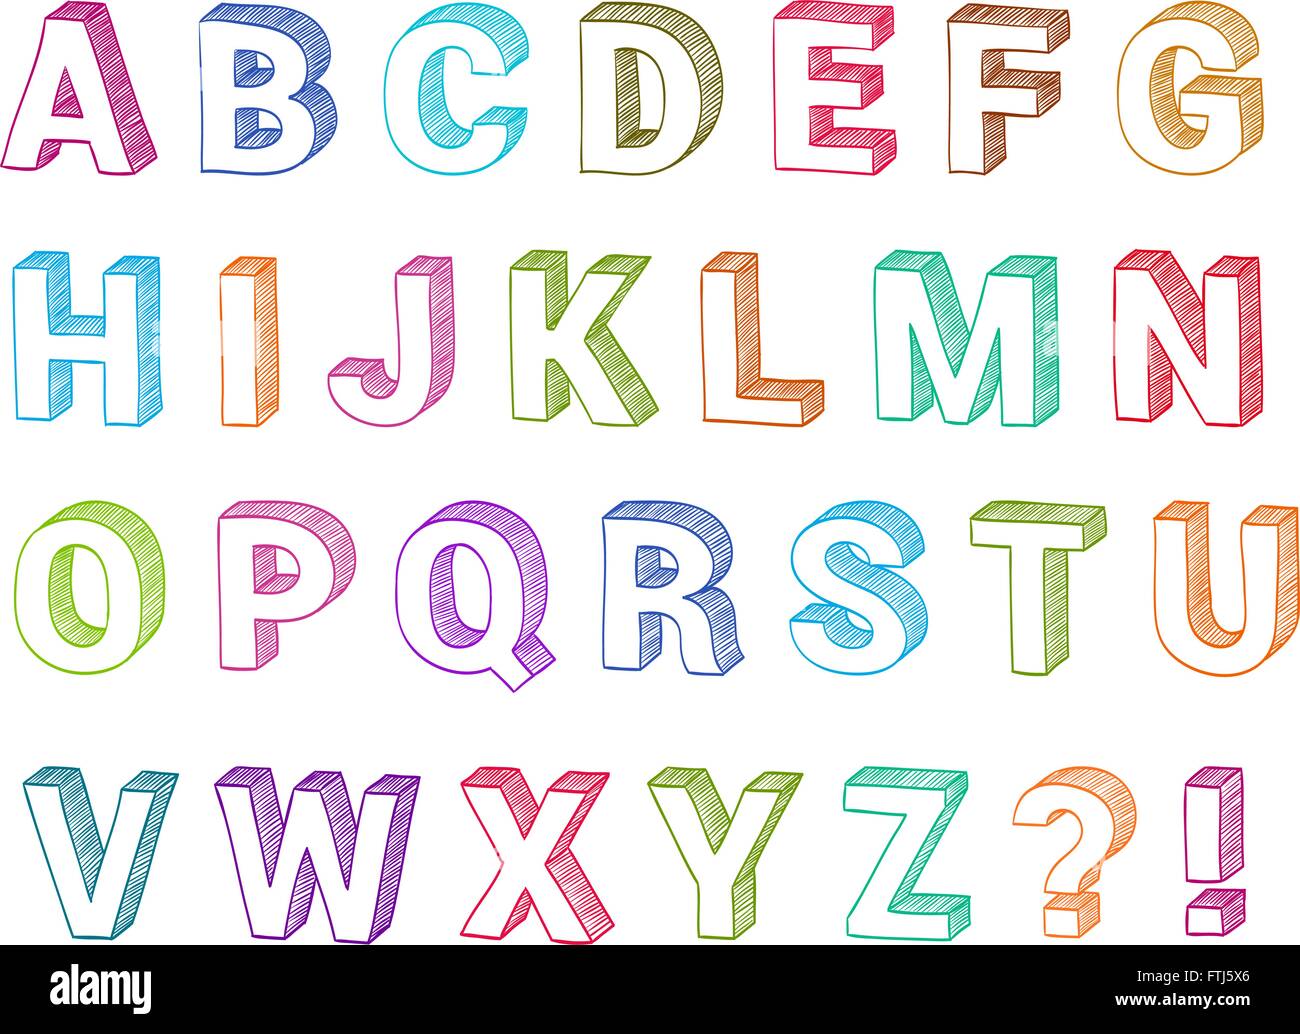 Alphabet set 3d form hand drawn vector. Sketch font for school abc learning or graphic design. Capital letters Stock Vector